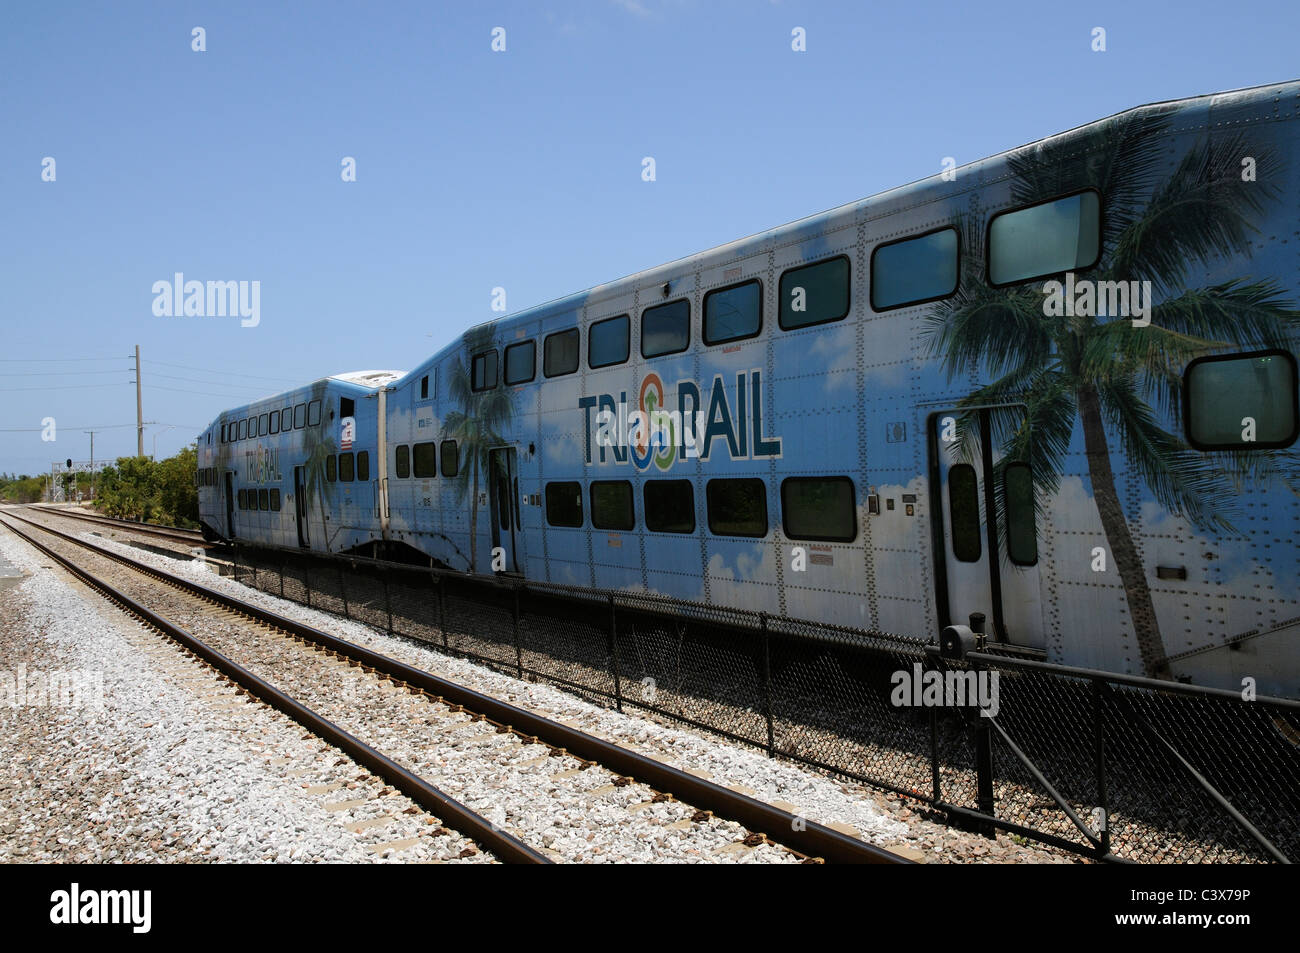 How to get to Boca Raton, FL by Bus or Train?